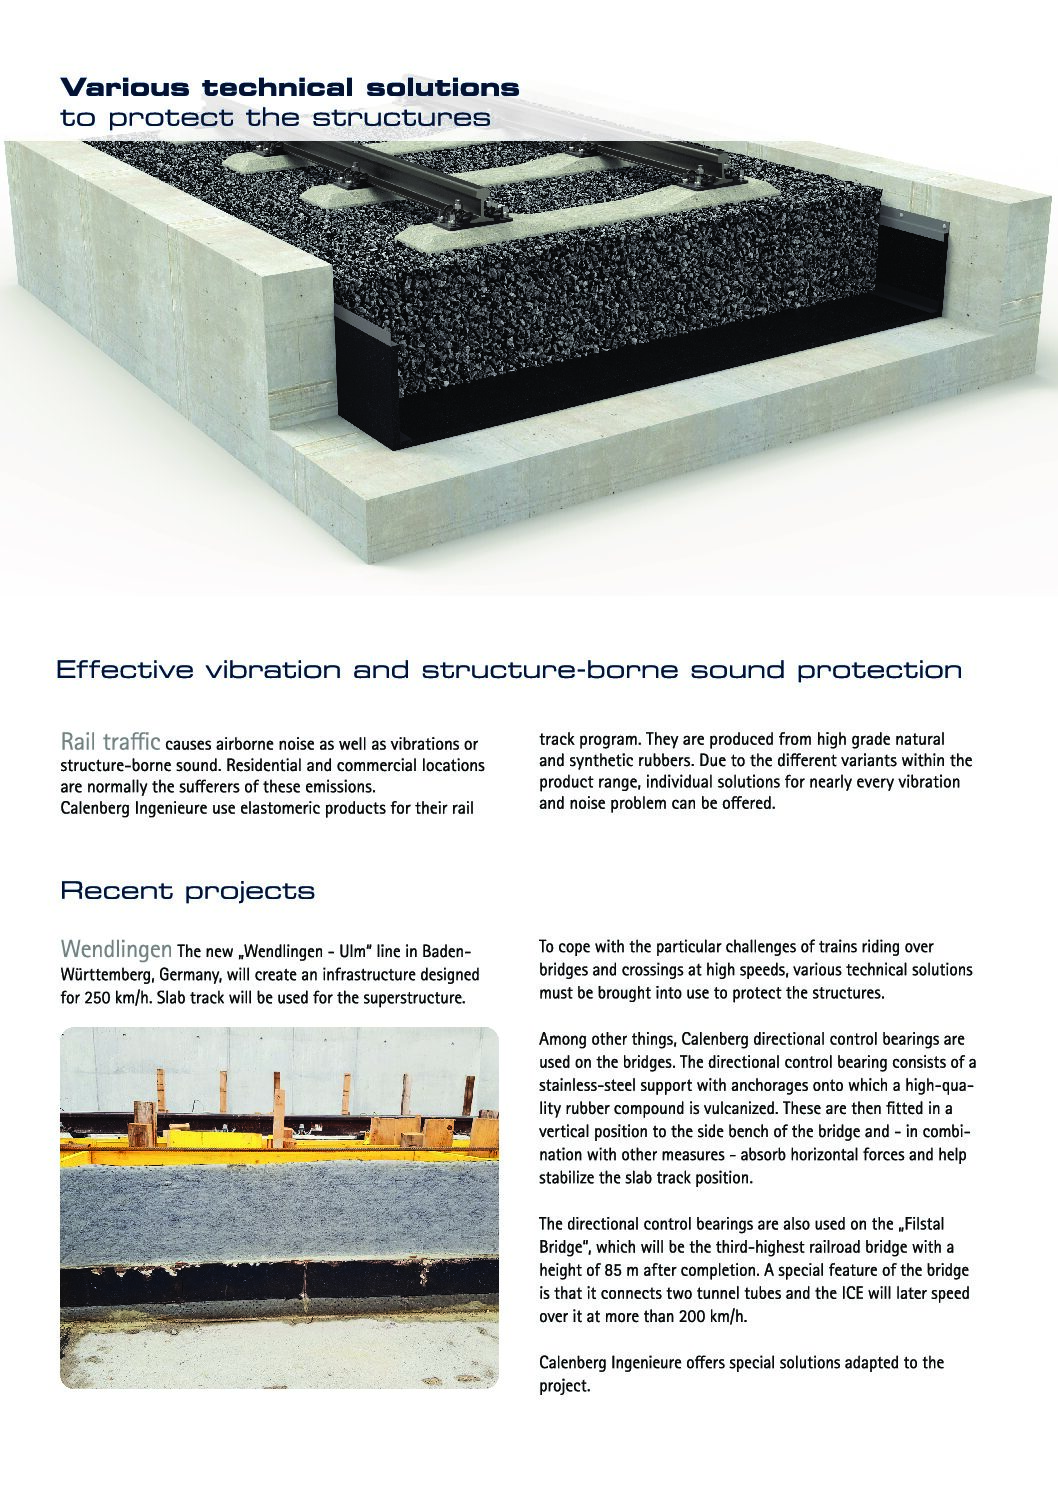 Effective Vibration and Structure-Borne Sound Protection